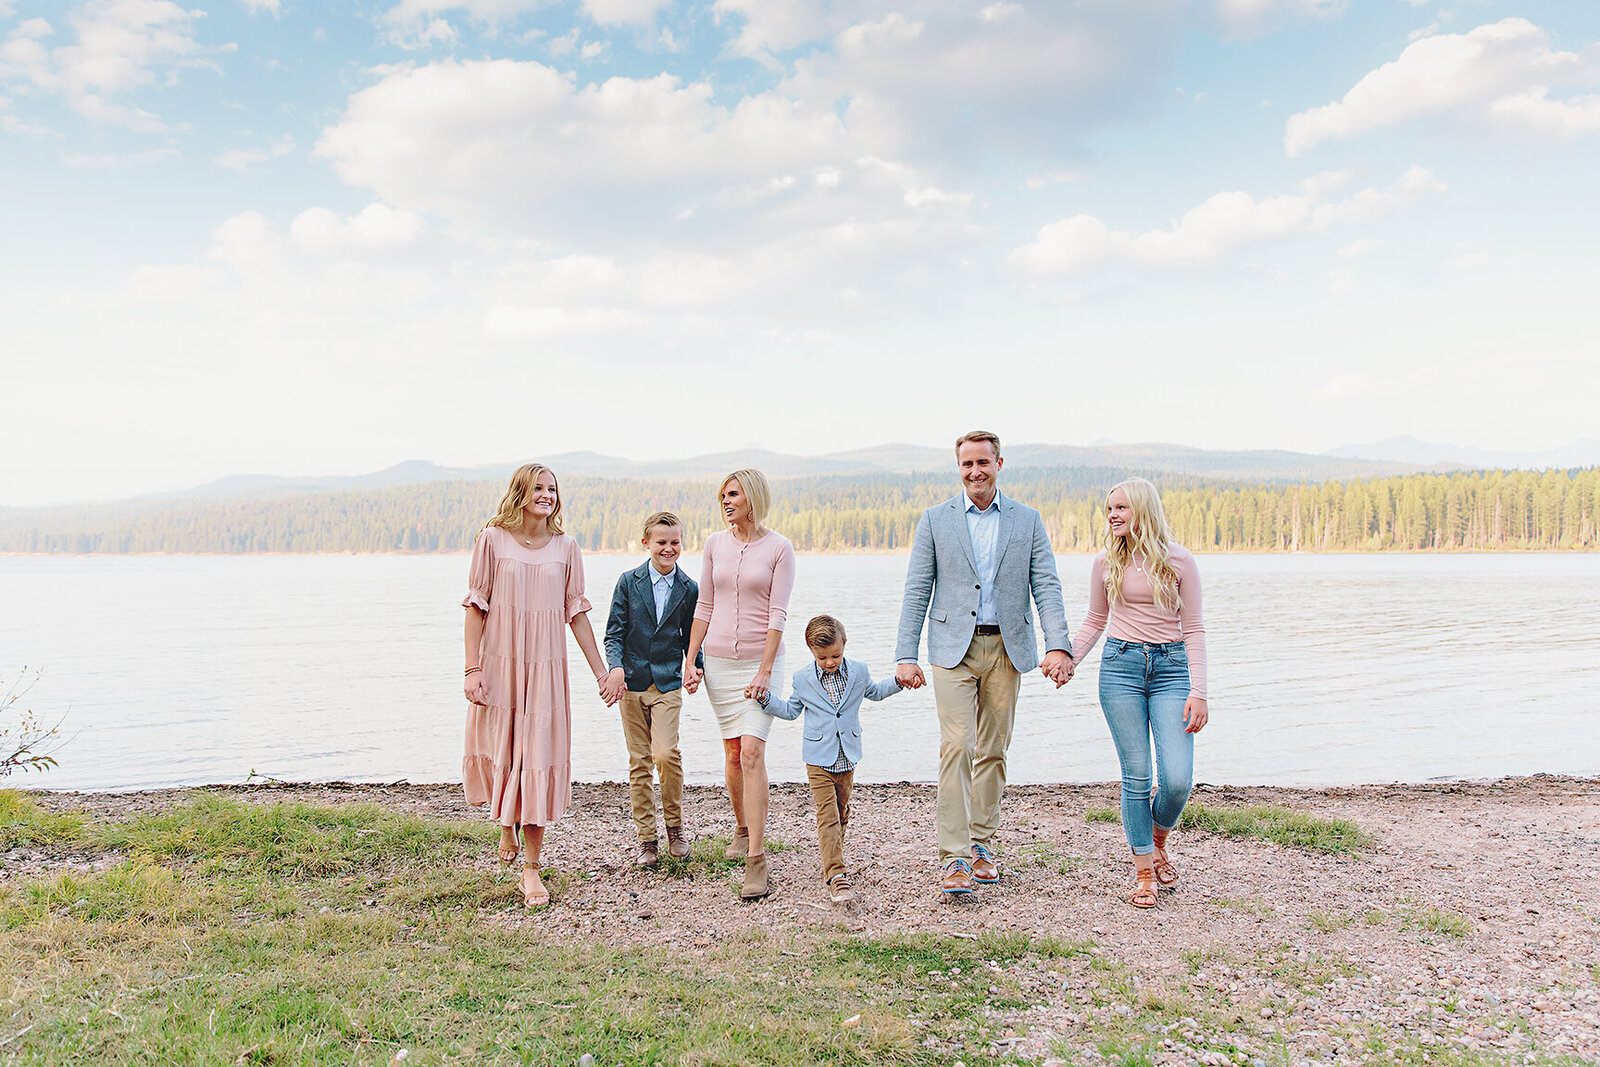 Wendy Parrish Photography is a Missoula family photographer specializing in newborn, maternity, family and seniors serving Missoula, Great Falls, The Bitterroot Valley and the surrounding areas